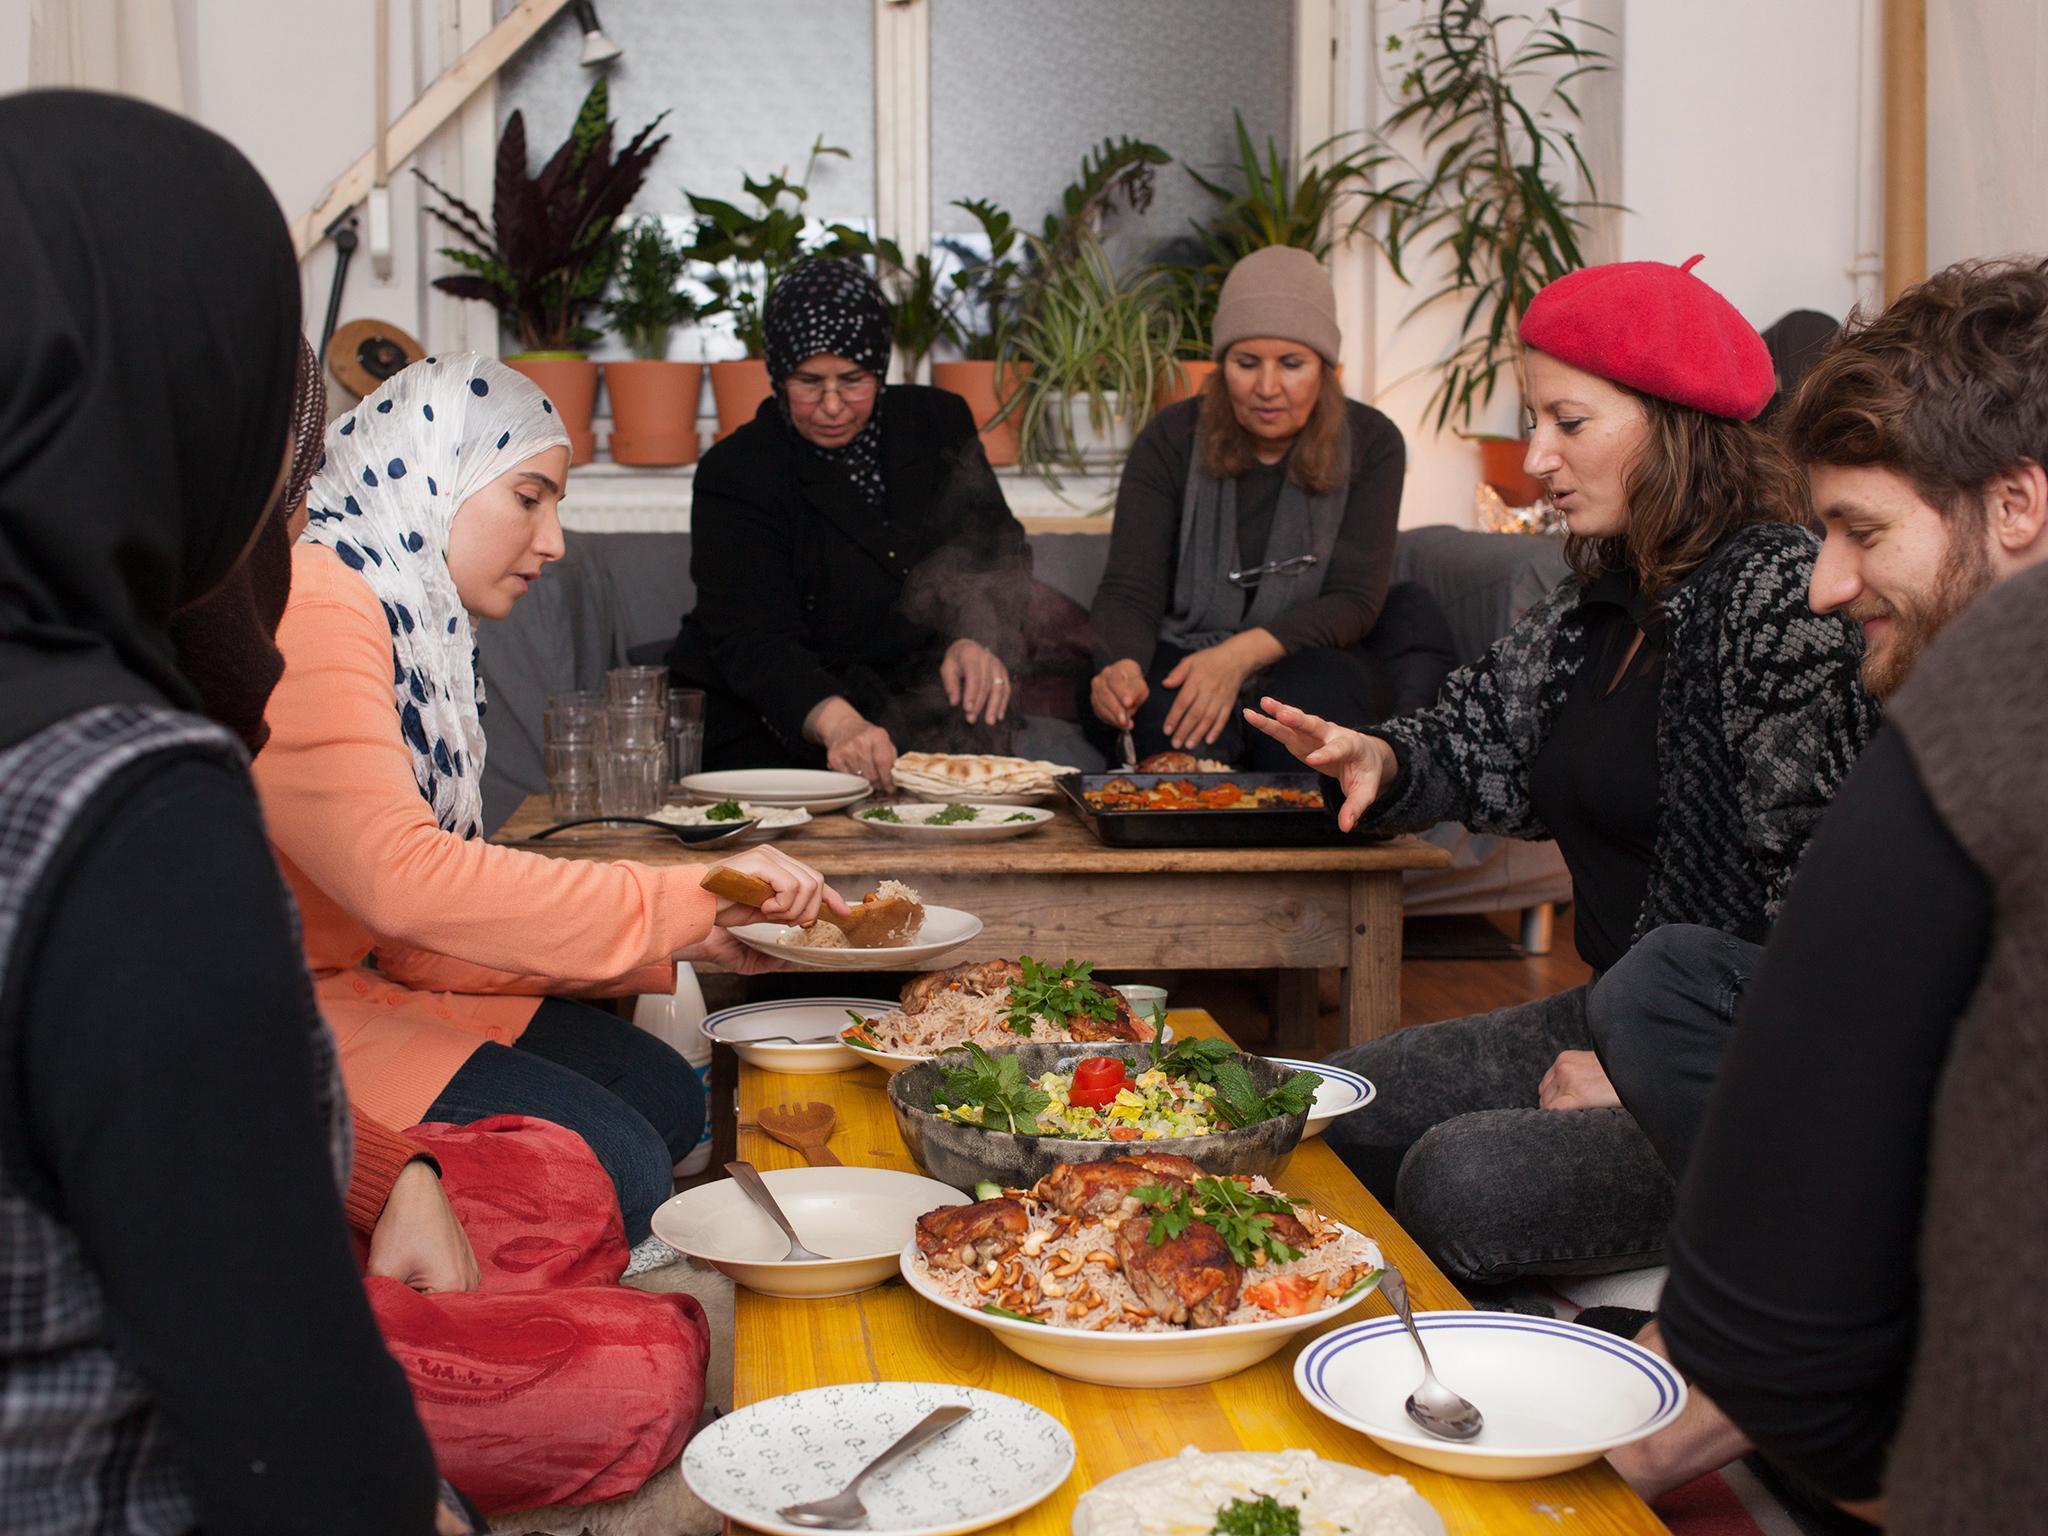 The dinners also give Berliners a chance to learn about their city’s new residents